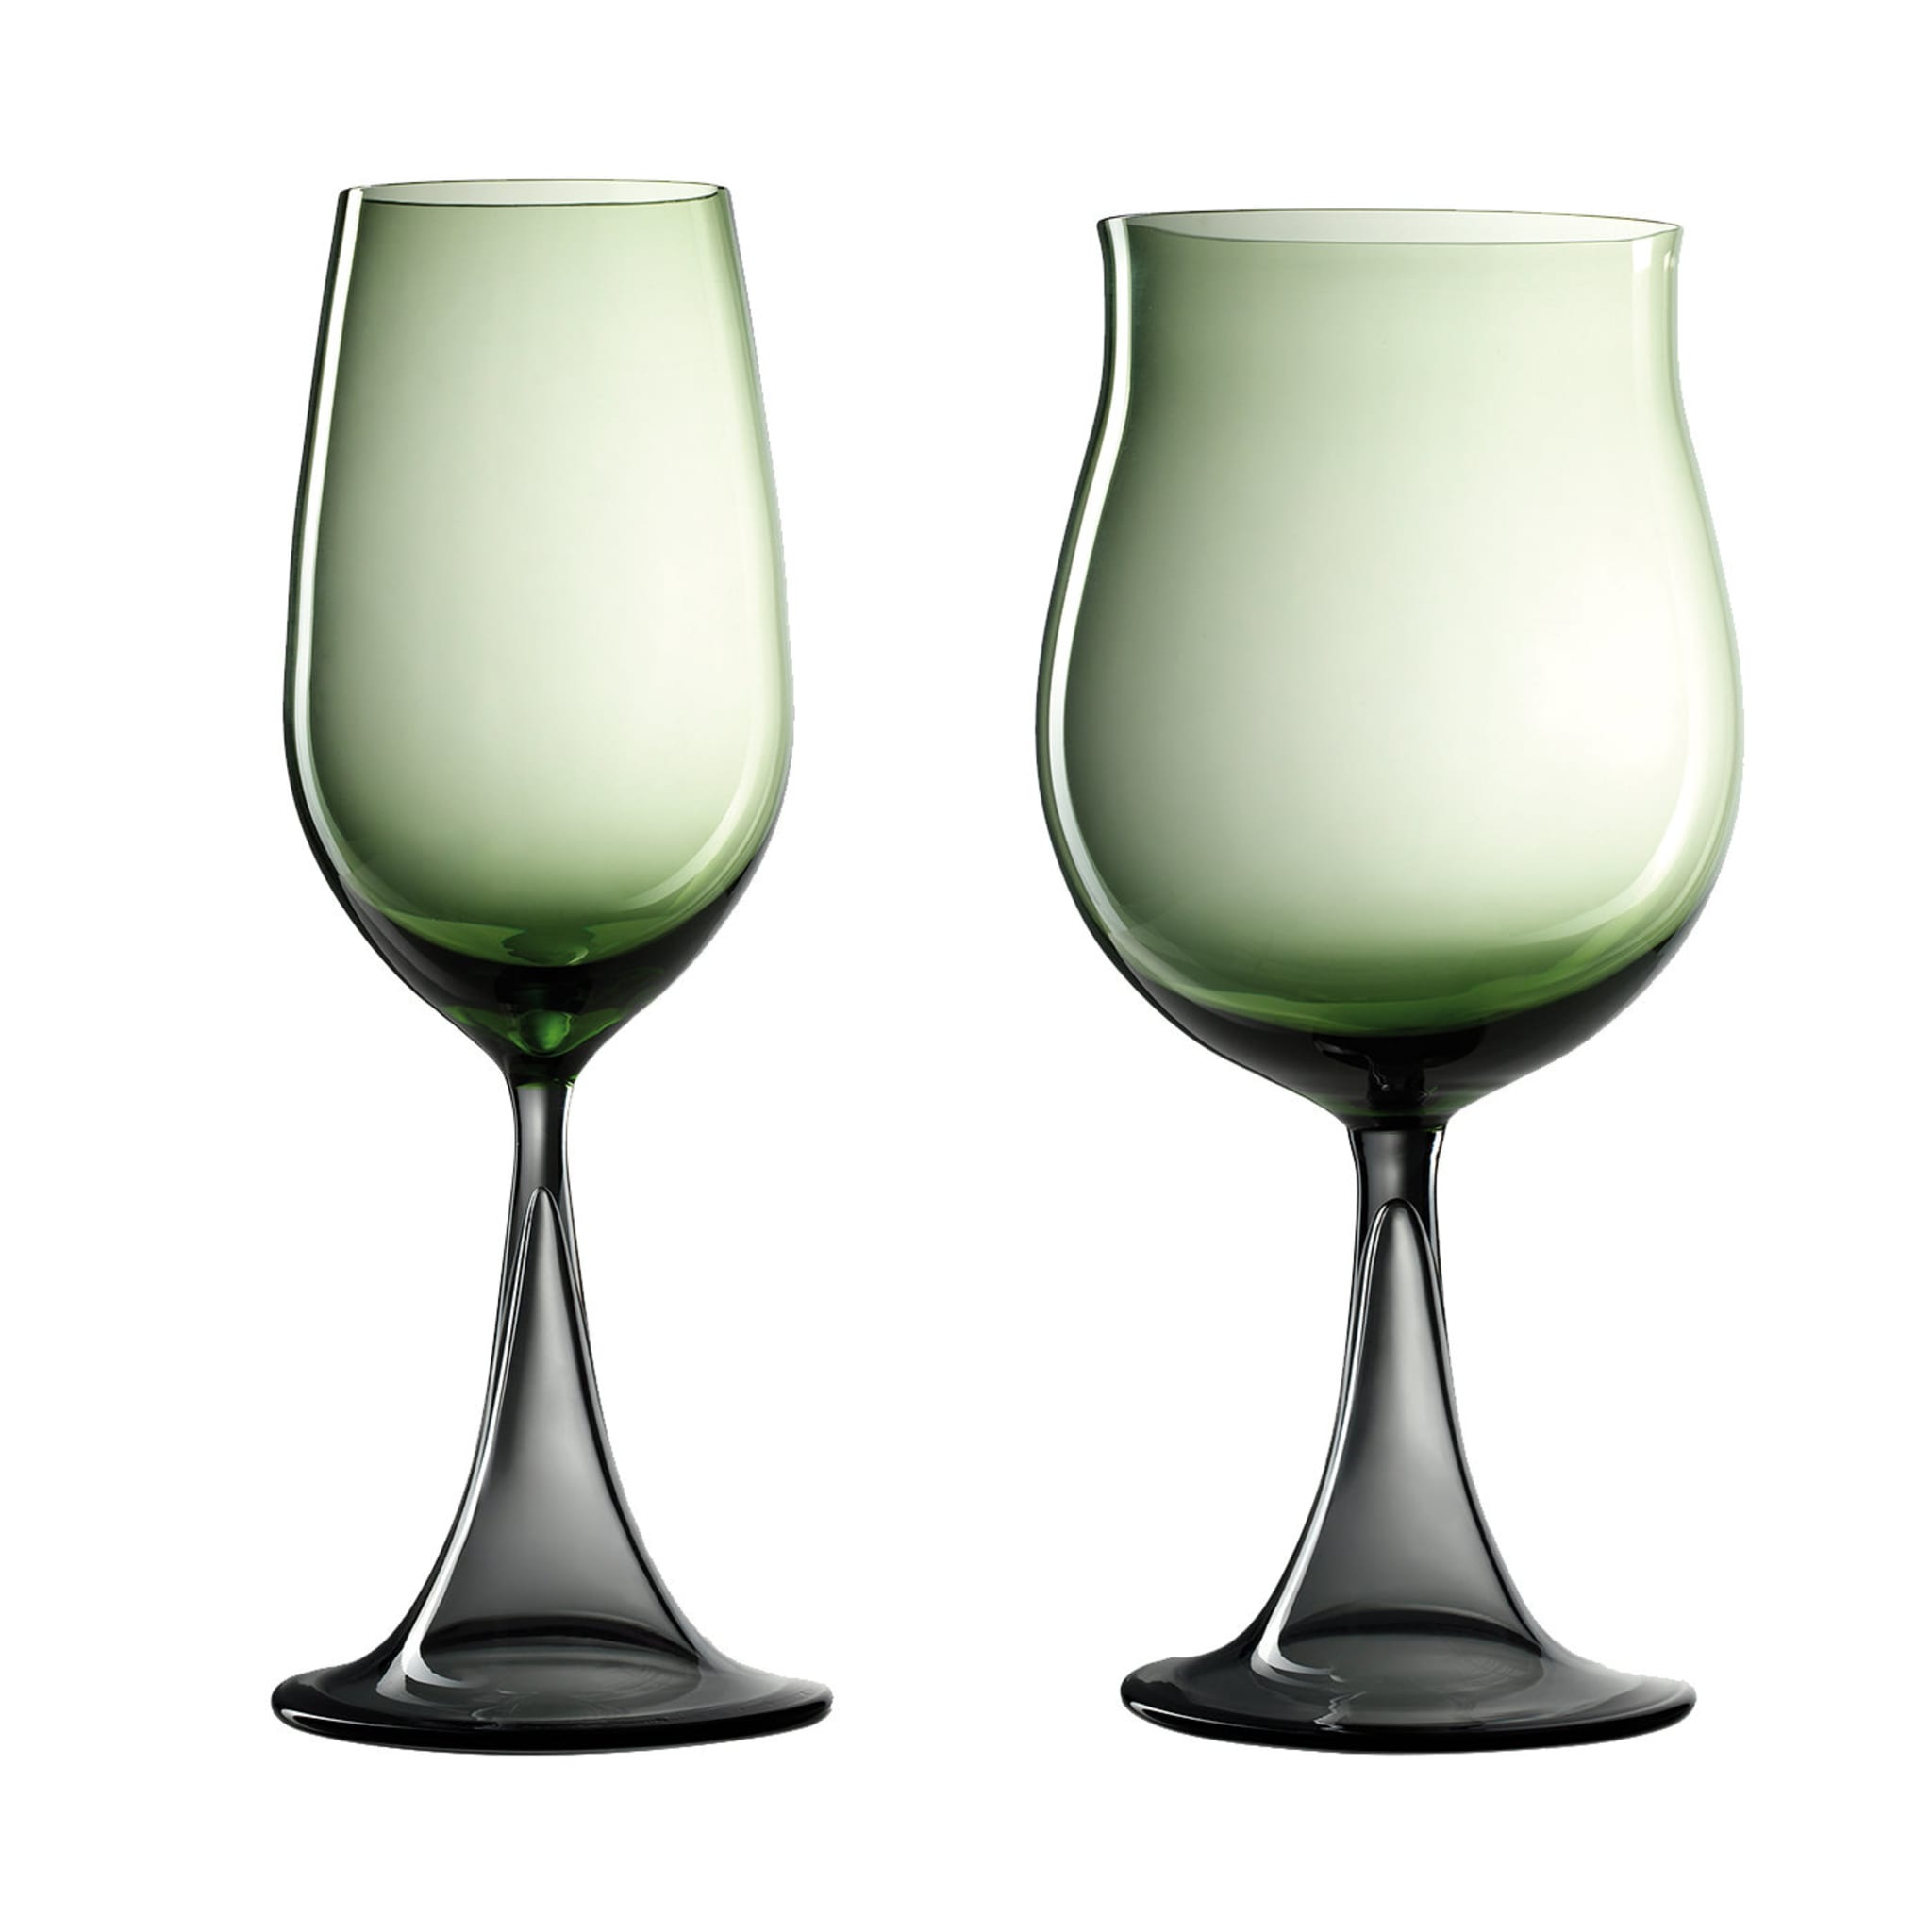 Mille e Una Notte Set of Bourgogne Gran Cru and Riesling Green Wine Glasses by NasonMoretti and Stefano Marcato - Main view